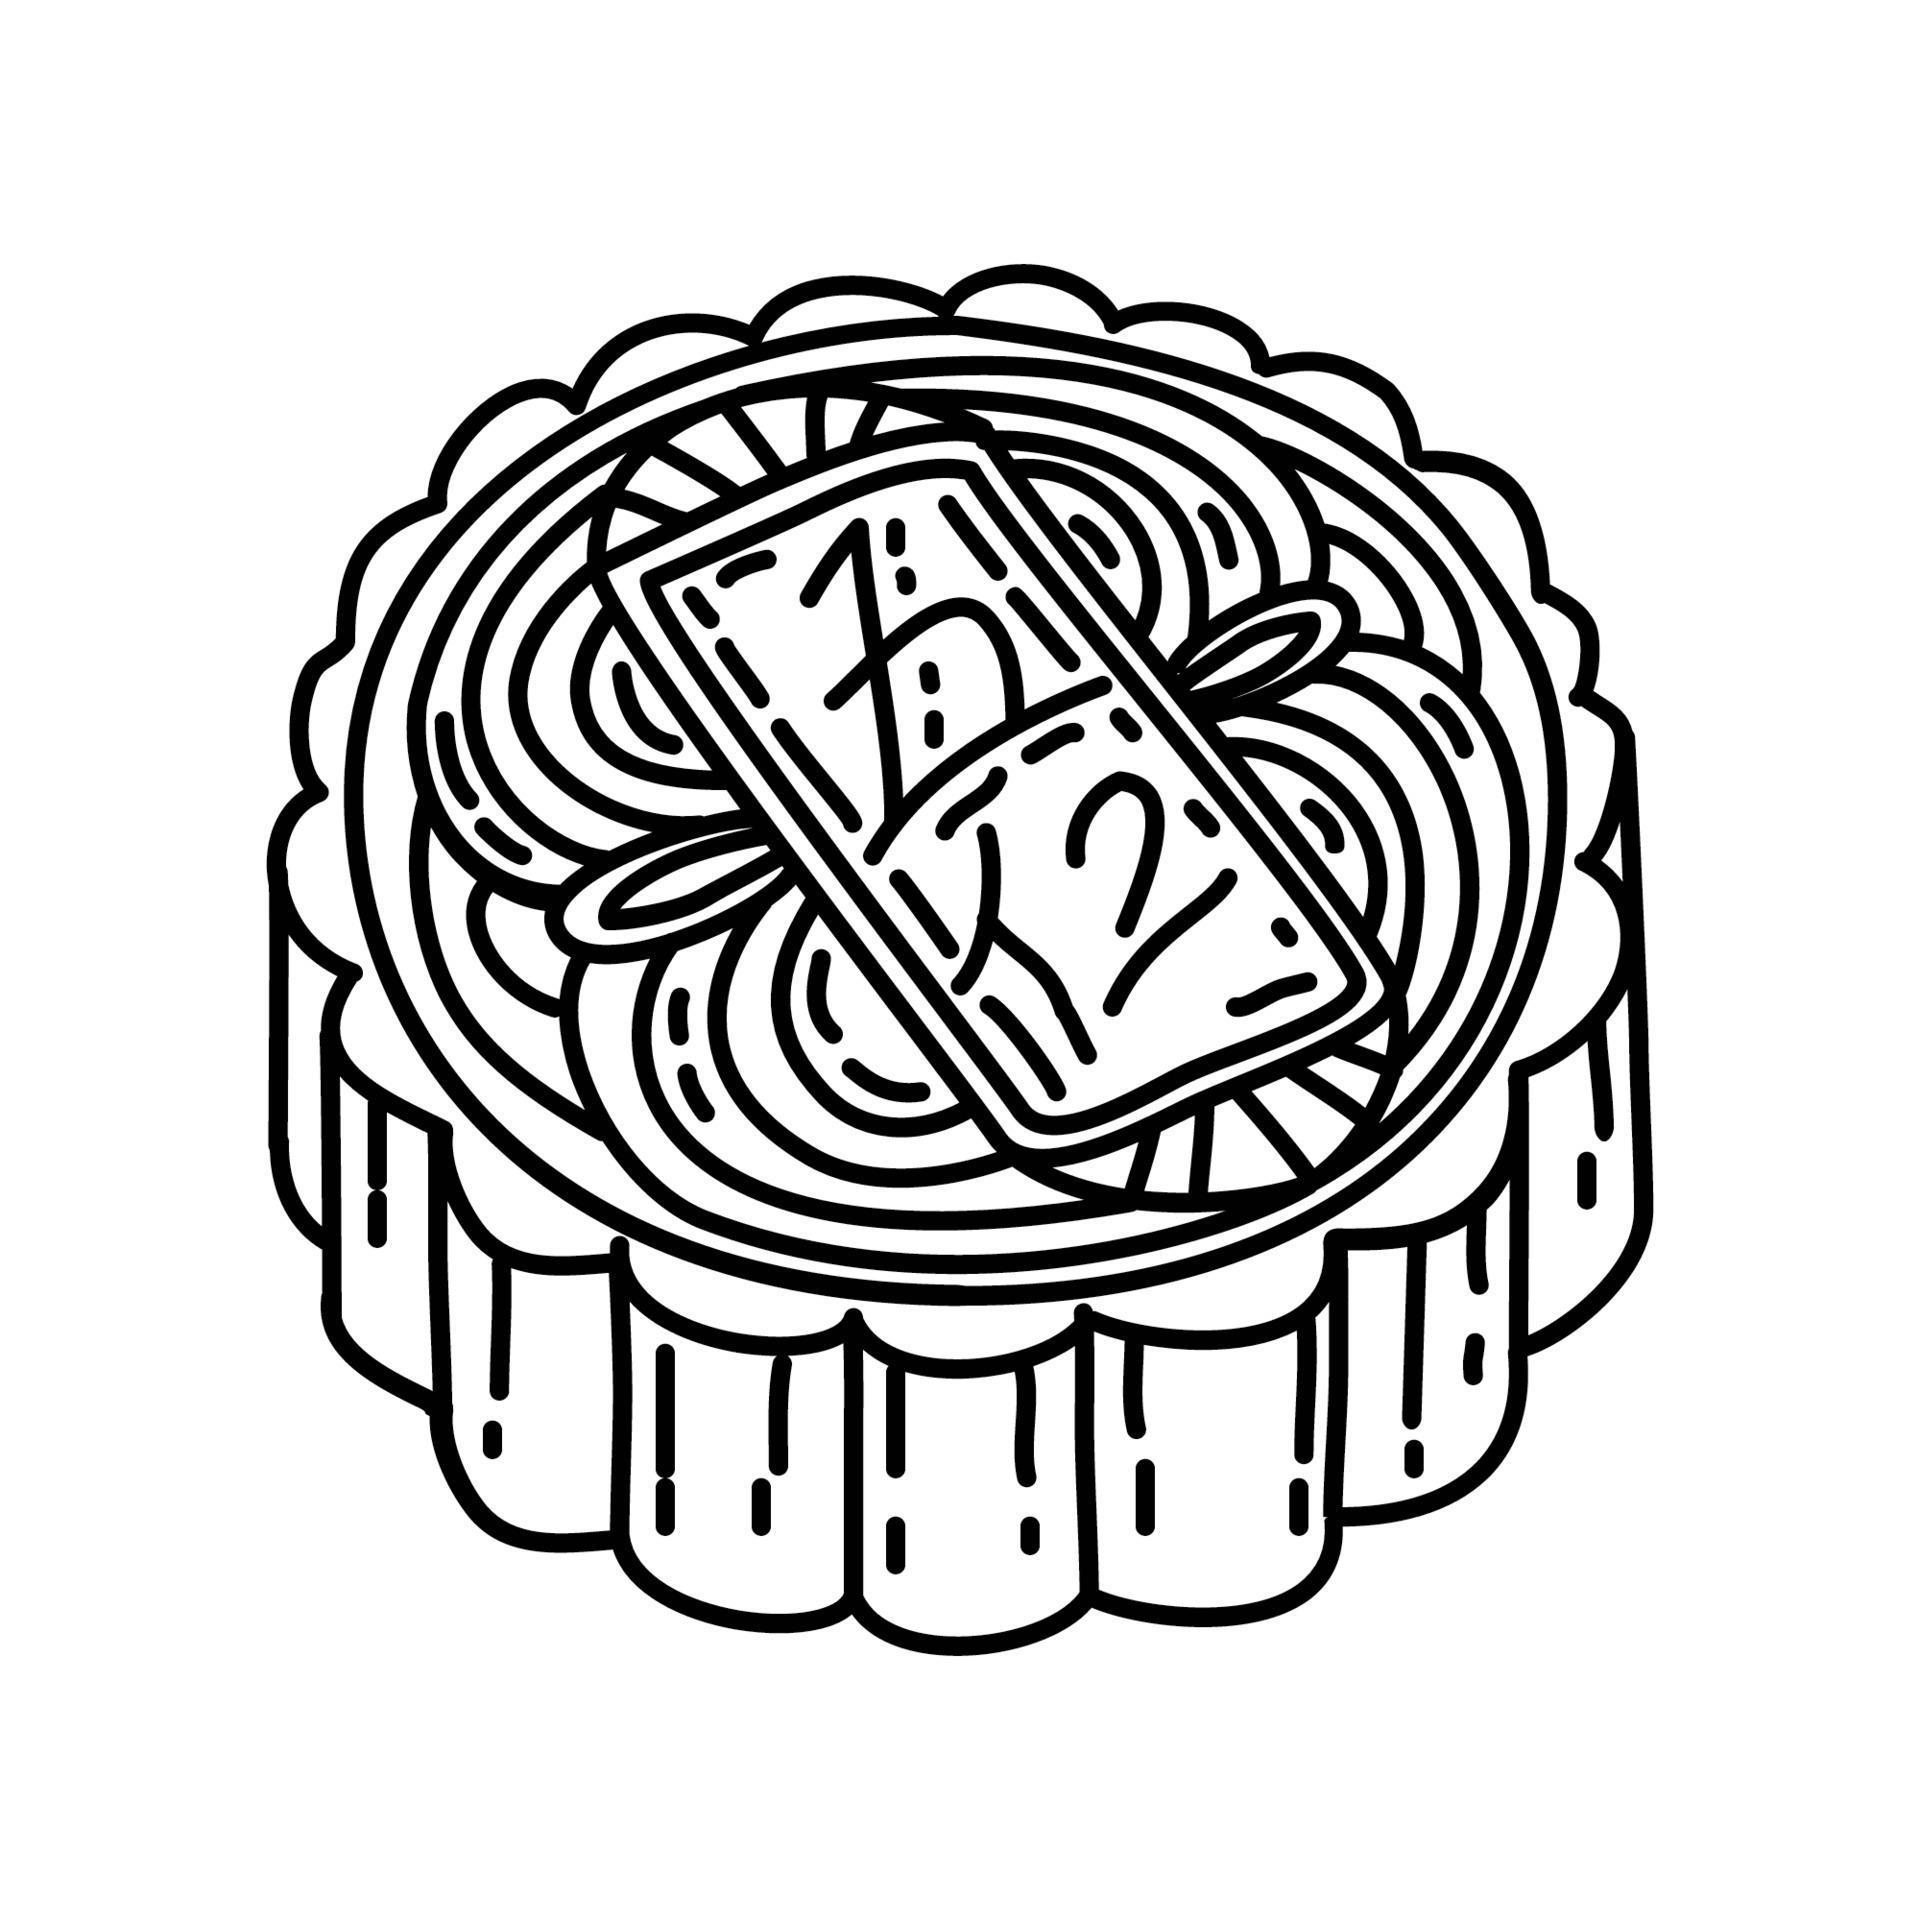 mooncake-icon-doodle-hand-drawn-or-outline-icon-style-1976477-vector